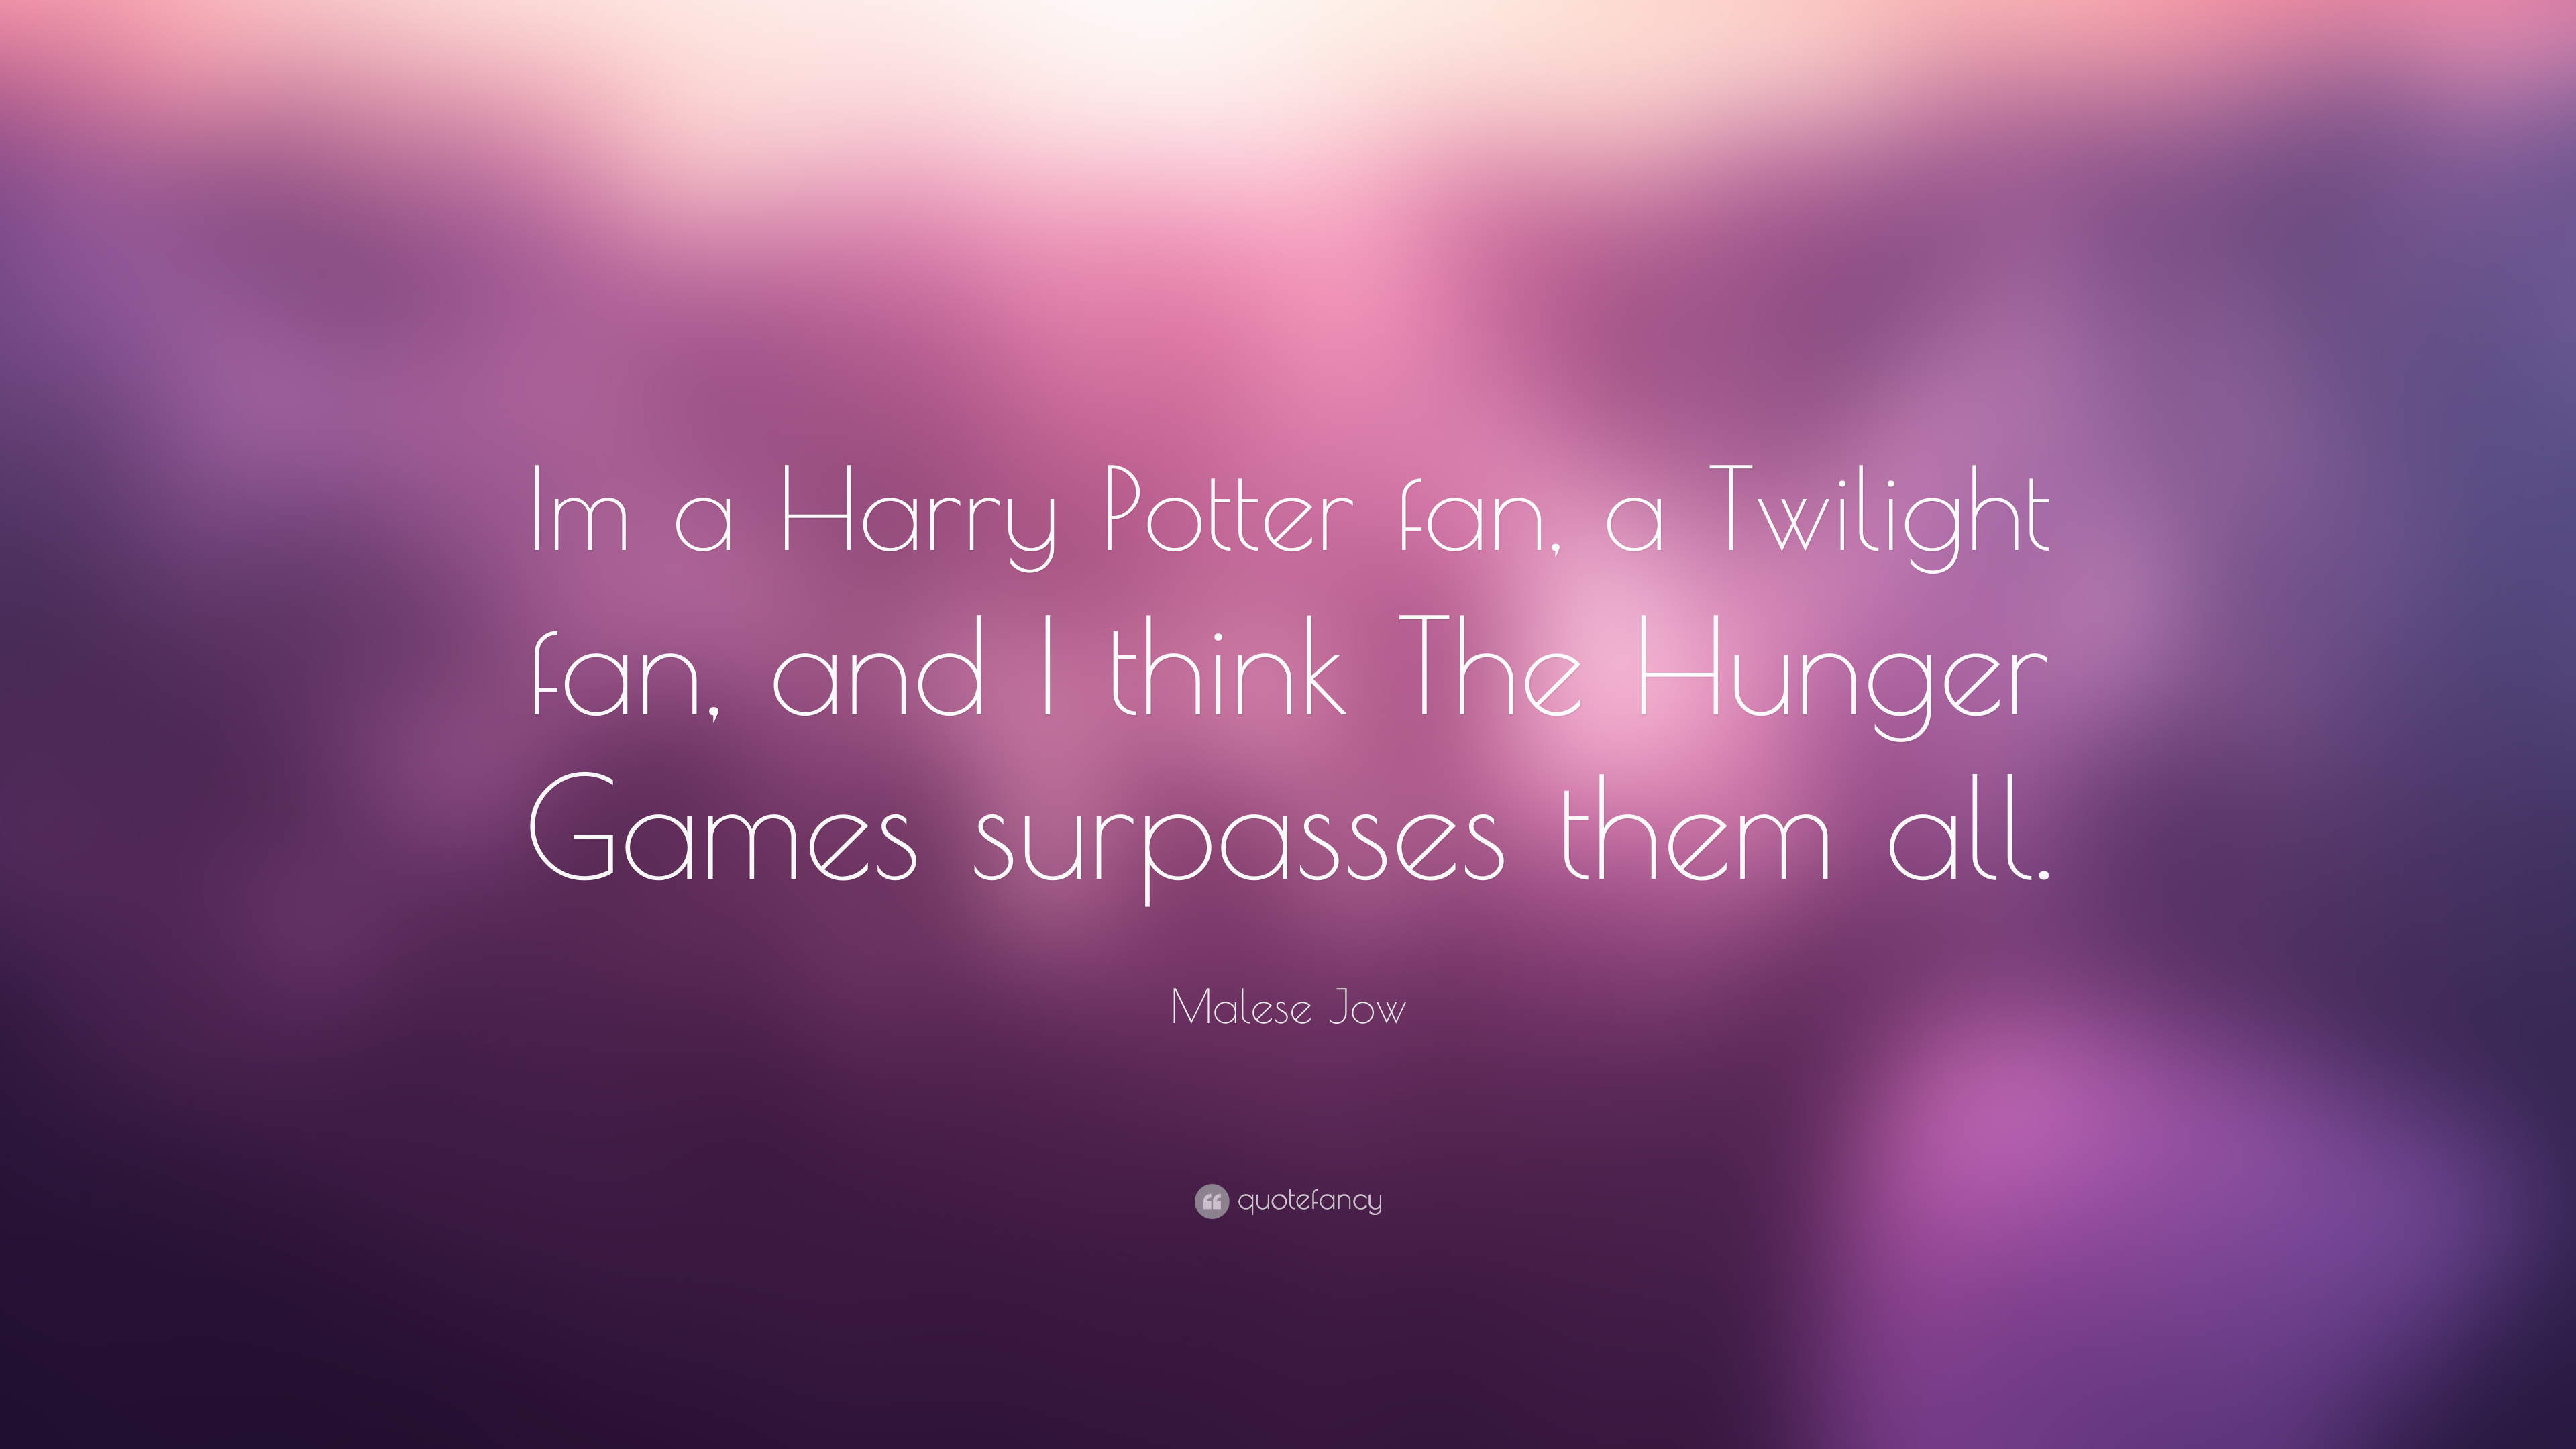 Malese Jow Quote: “Im a Harry Potter fan, a Twilight fan, and I think The Hunger